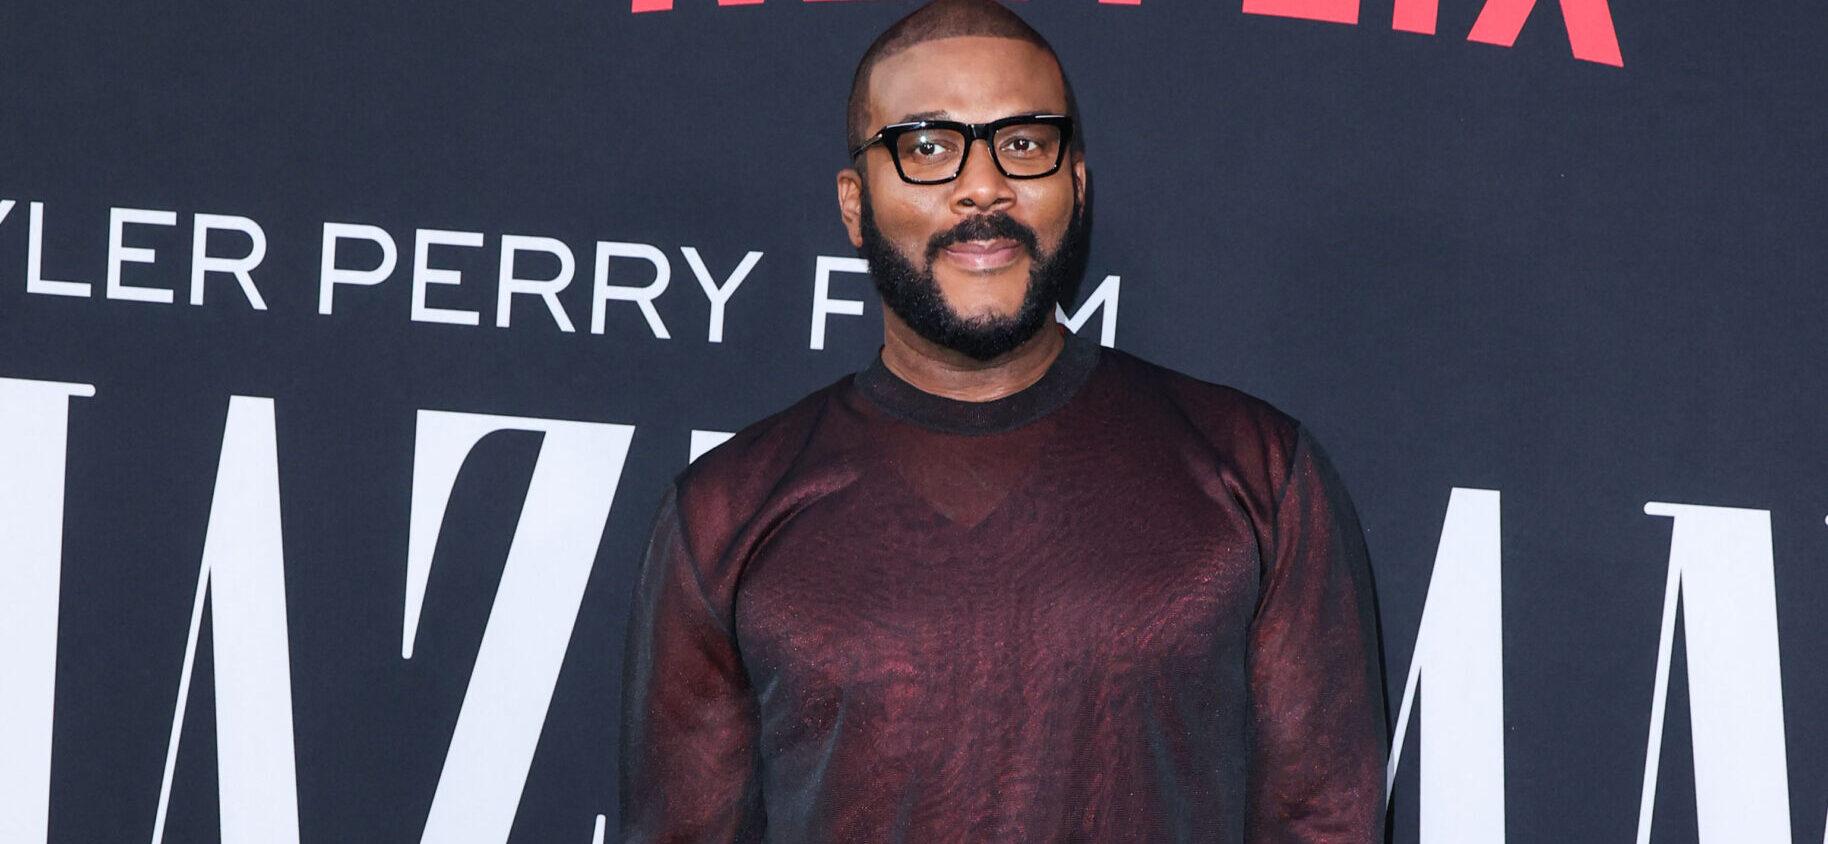 Tyler Perry To Build A New House For 93-Year-Old Losing Home To Developers